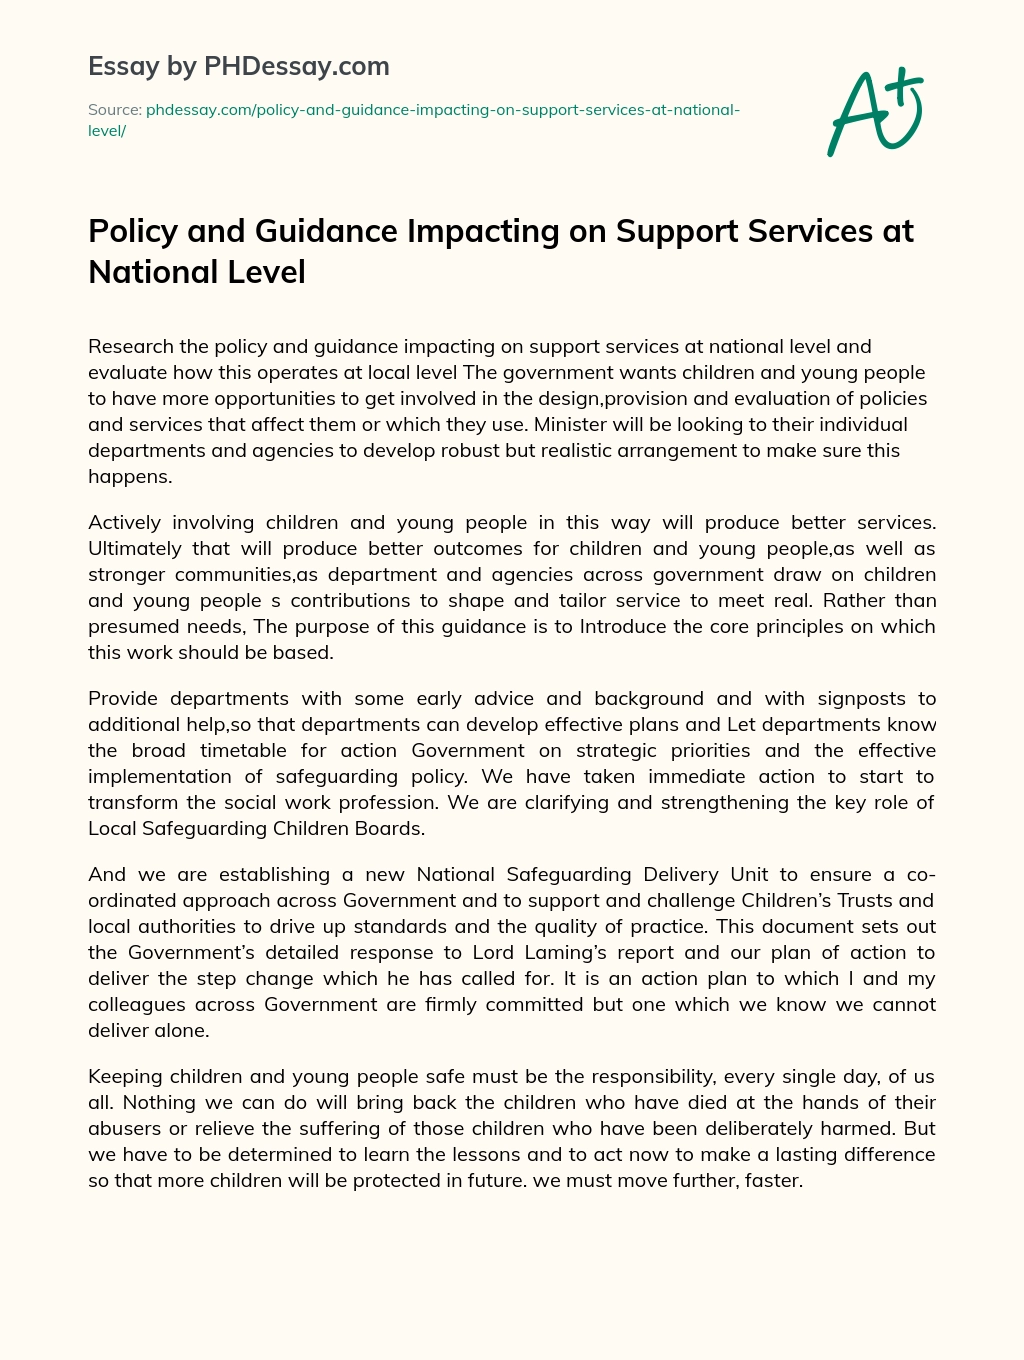 Policy and Guidance Impacting on Support Services at National Level essay